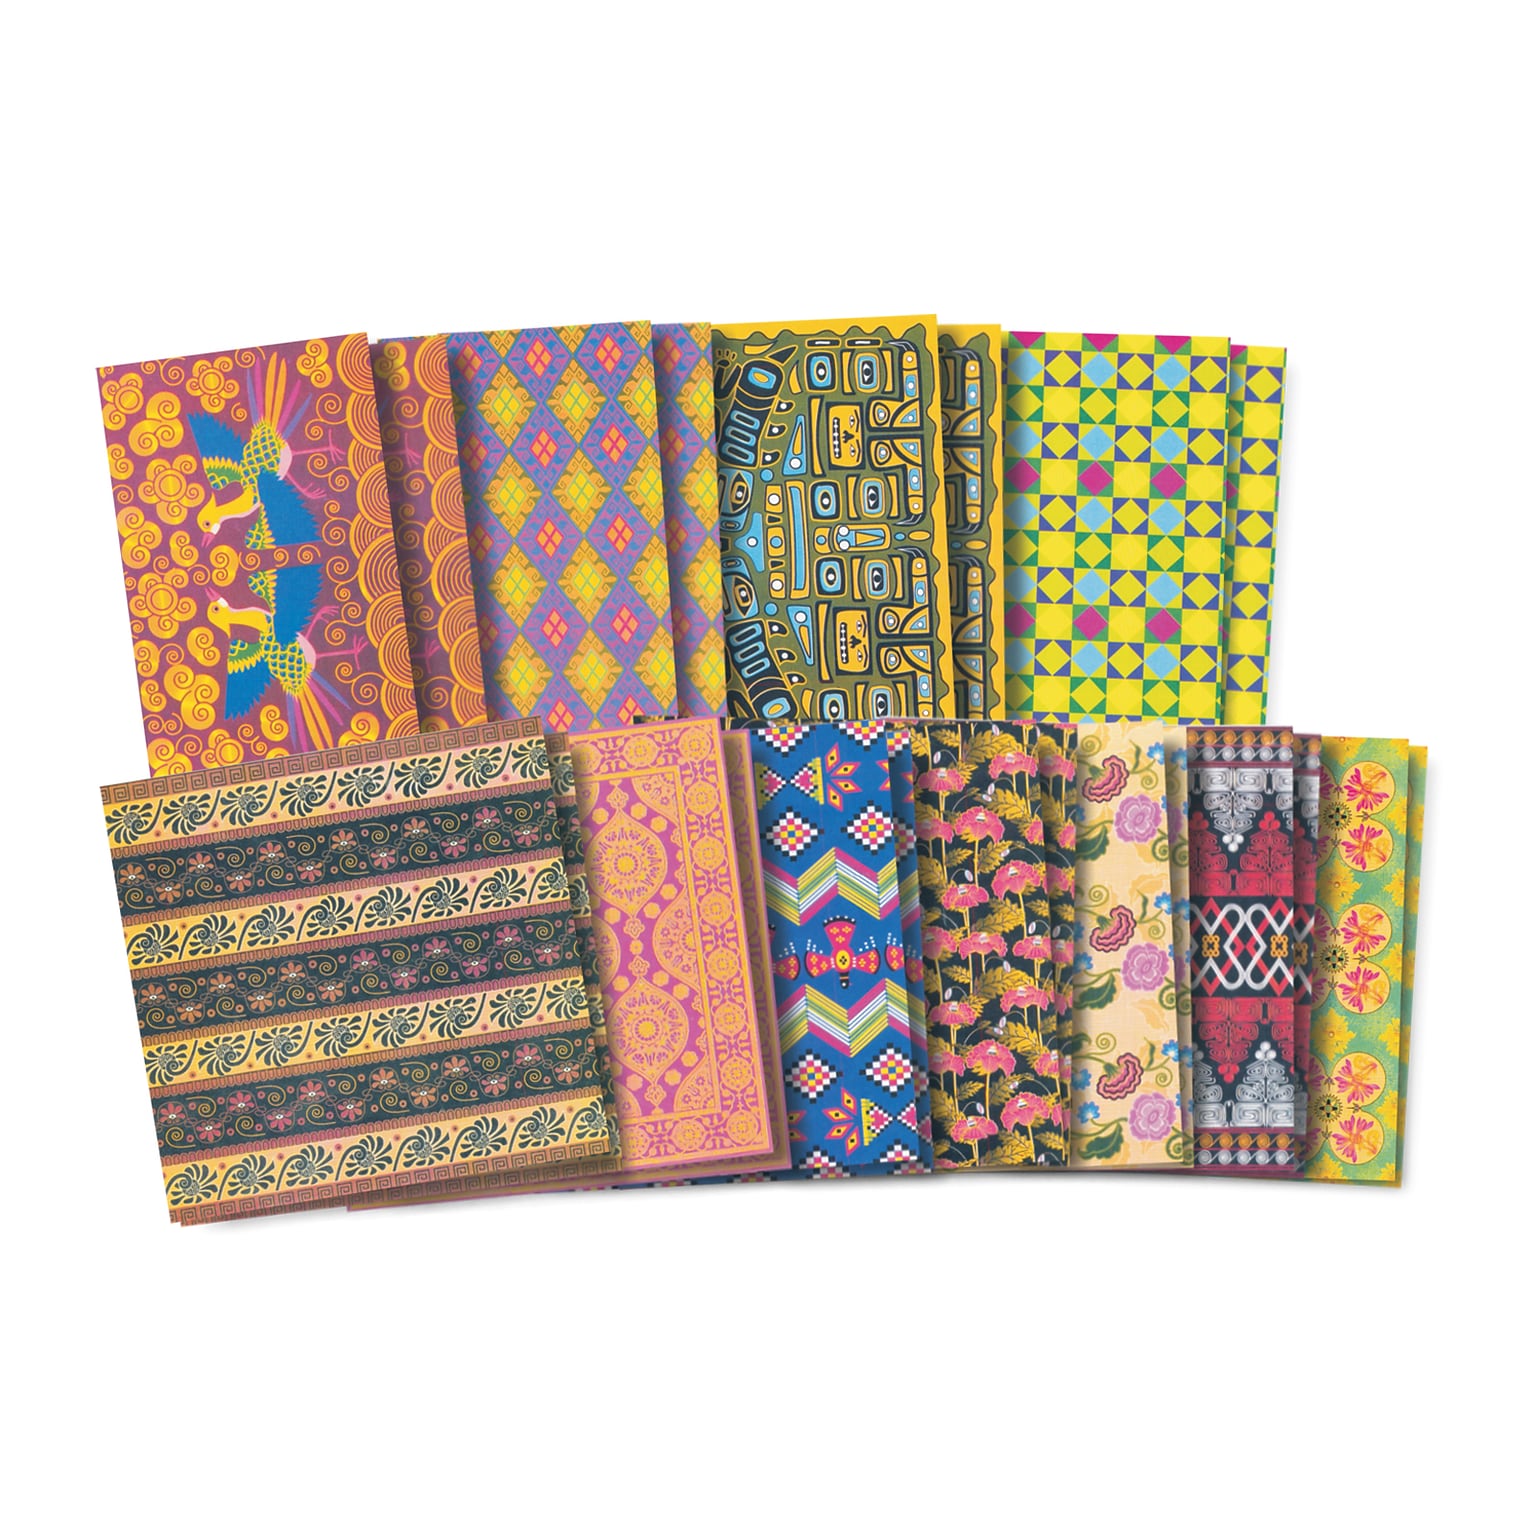 Roylco Global Village Craft Paper, Assorted Designs, 48 Sheets (R-15253)